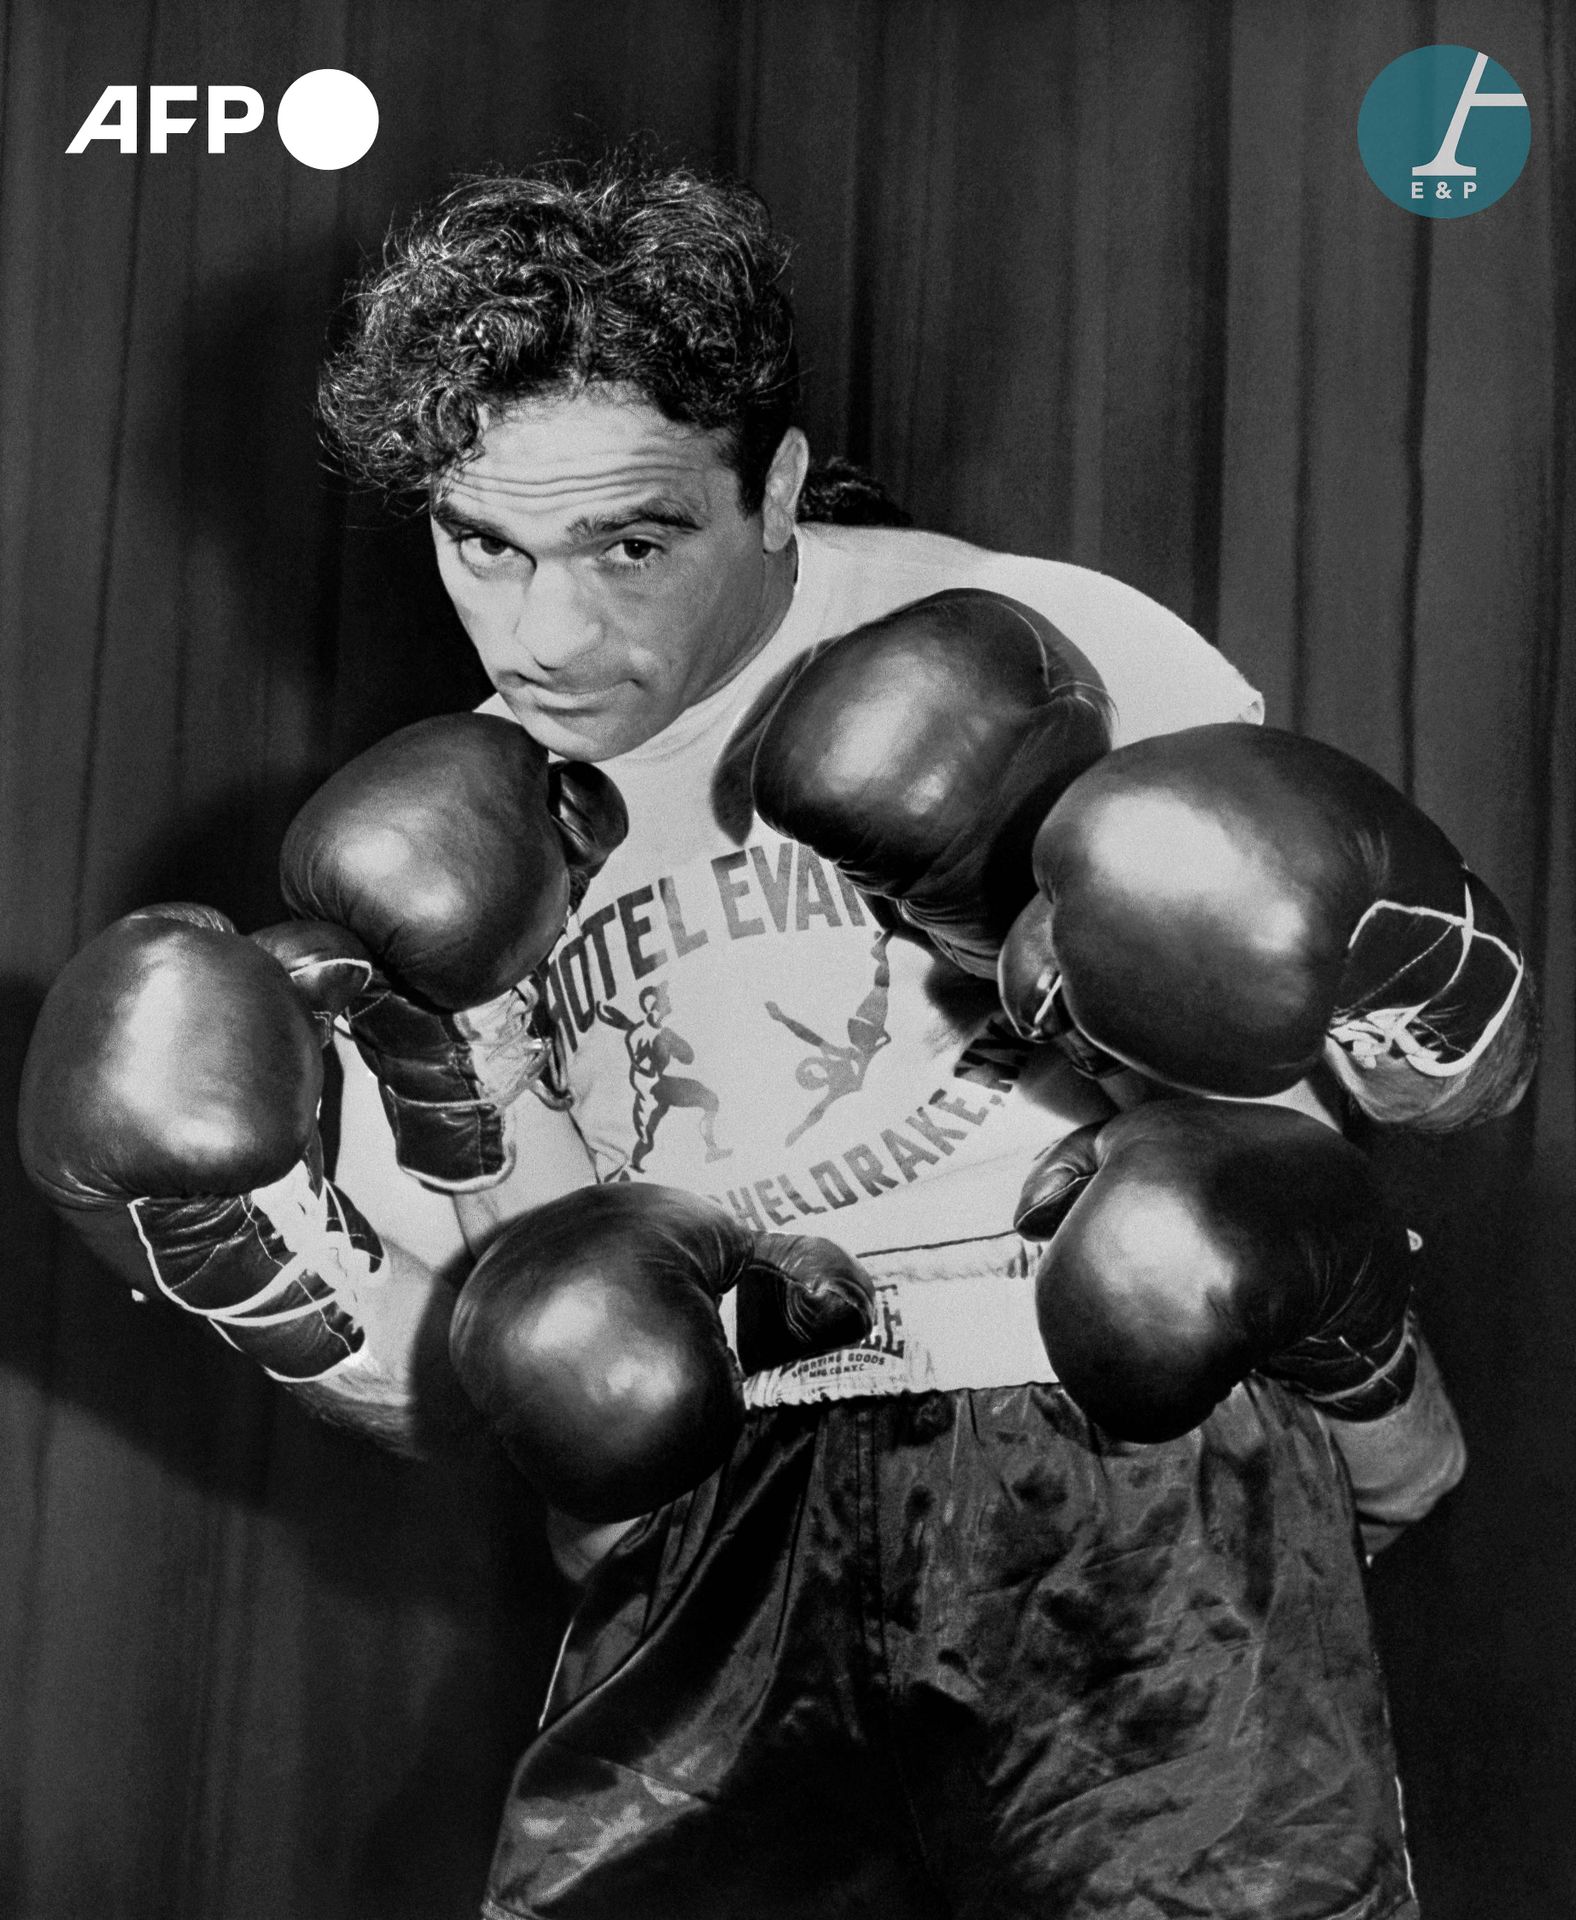 Null AFP

French boxer Marcel Cerdan, 1940s.

French boxer Marcel Cerdan, 1940's&hellip;